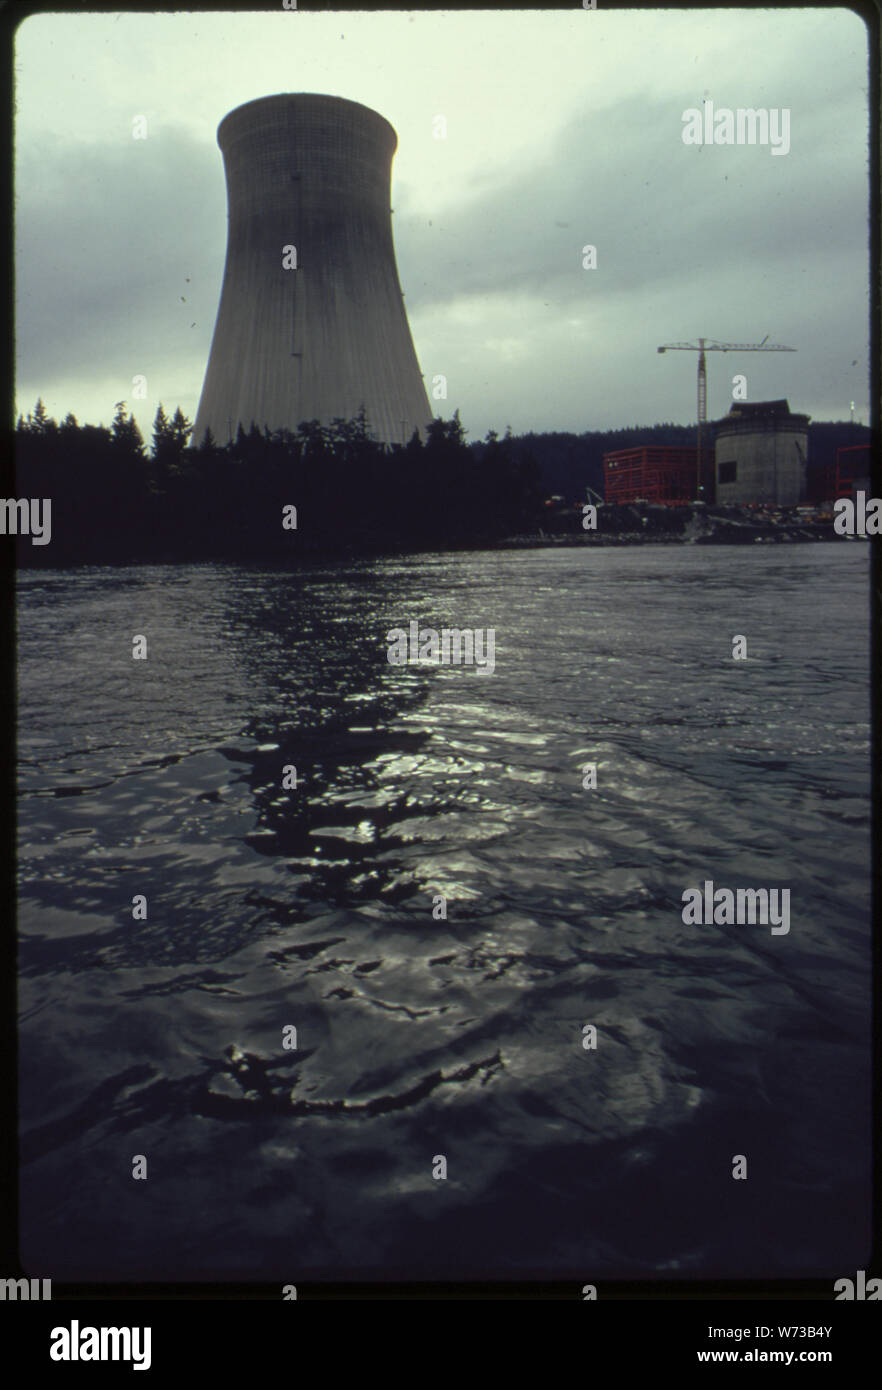 TROJAN NUCLEAR POWER PLANT ON THE COLUMBIA RIVER. (FROM THE SITES EXHIBITION. FOR OTHER IMAGES IN THIS ASSIGNMENT, SEE FICHE NUMBERS 42, 43, 44, 45, 46, 47.) Stock Photo